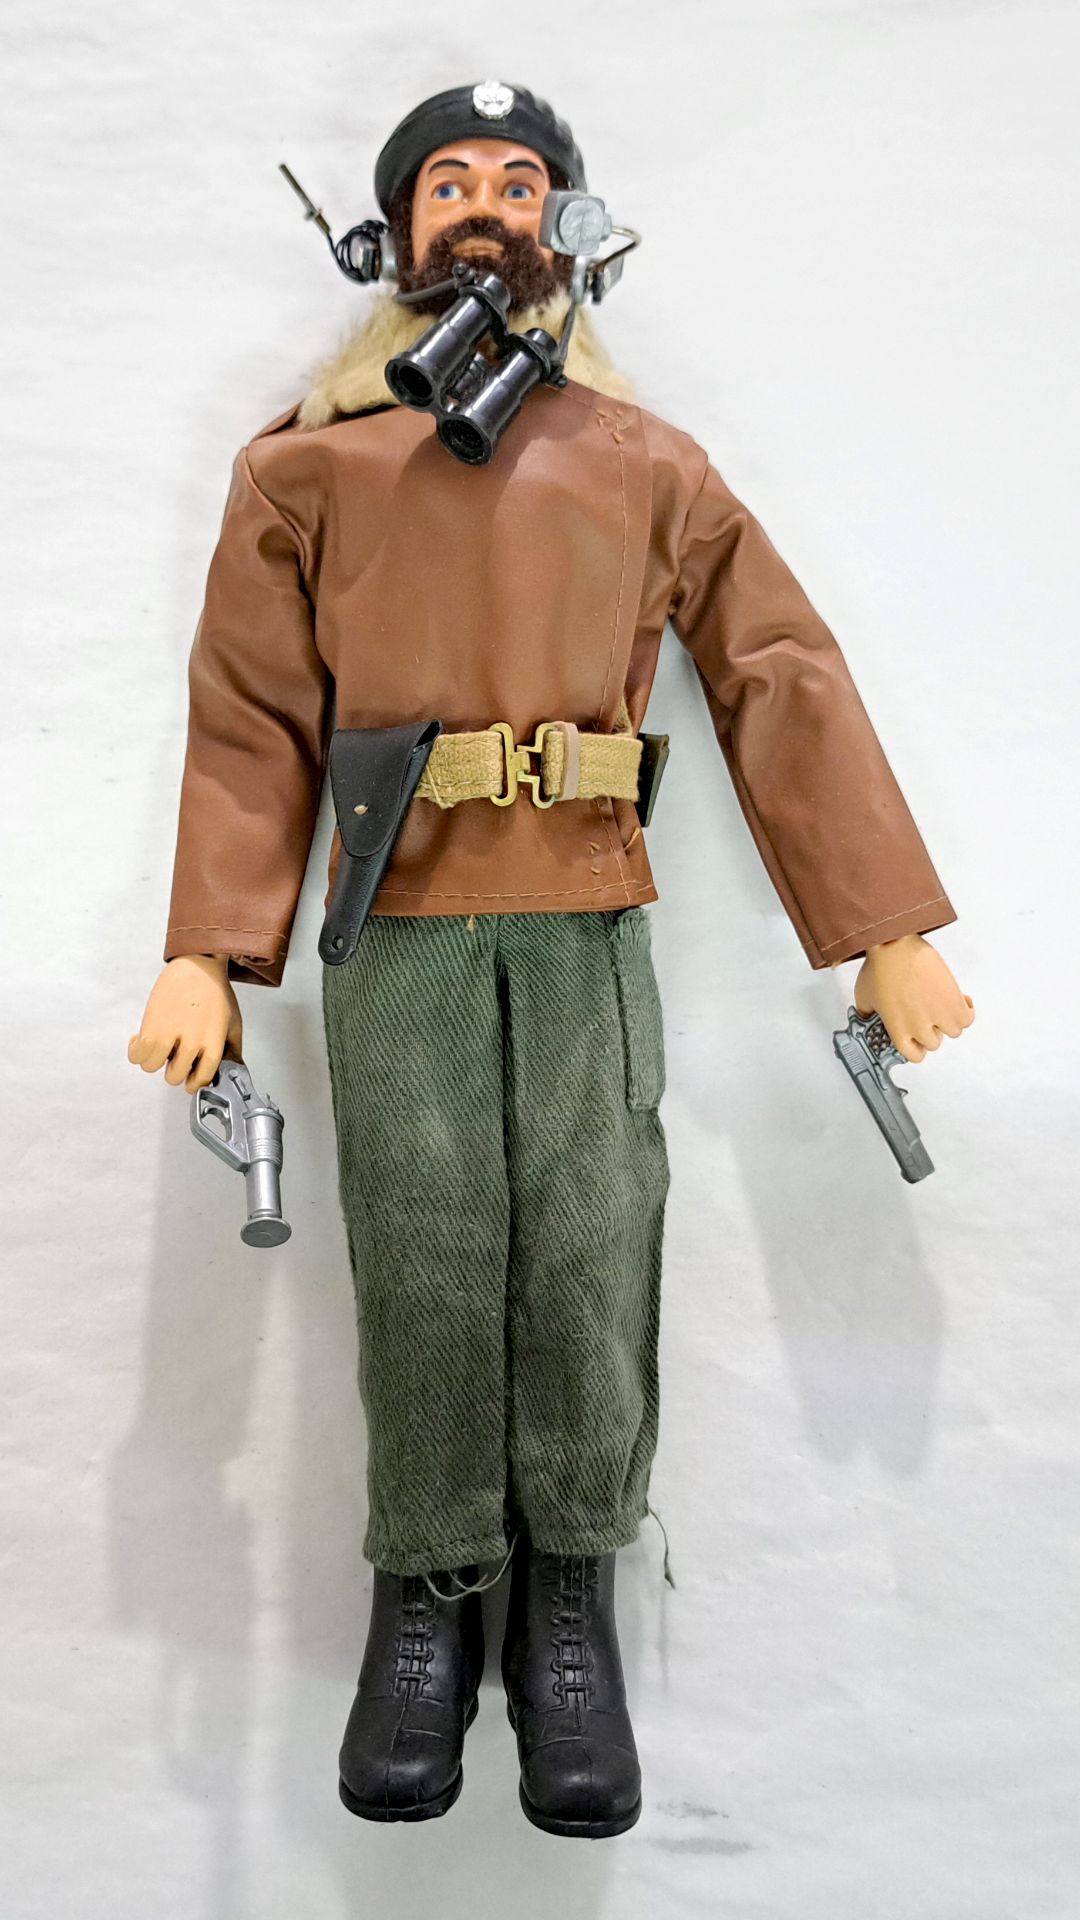 Palitoy Action Man Tank Commander, dark hair and beard, blue pants, eagle-eyes, gripping hands, w...